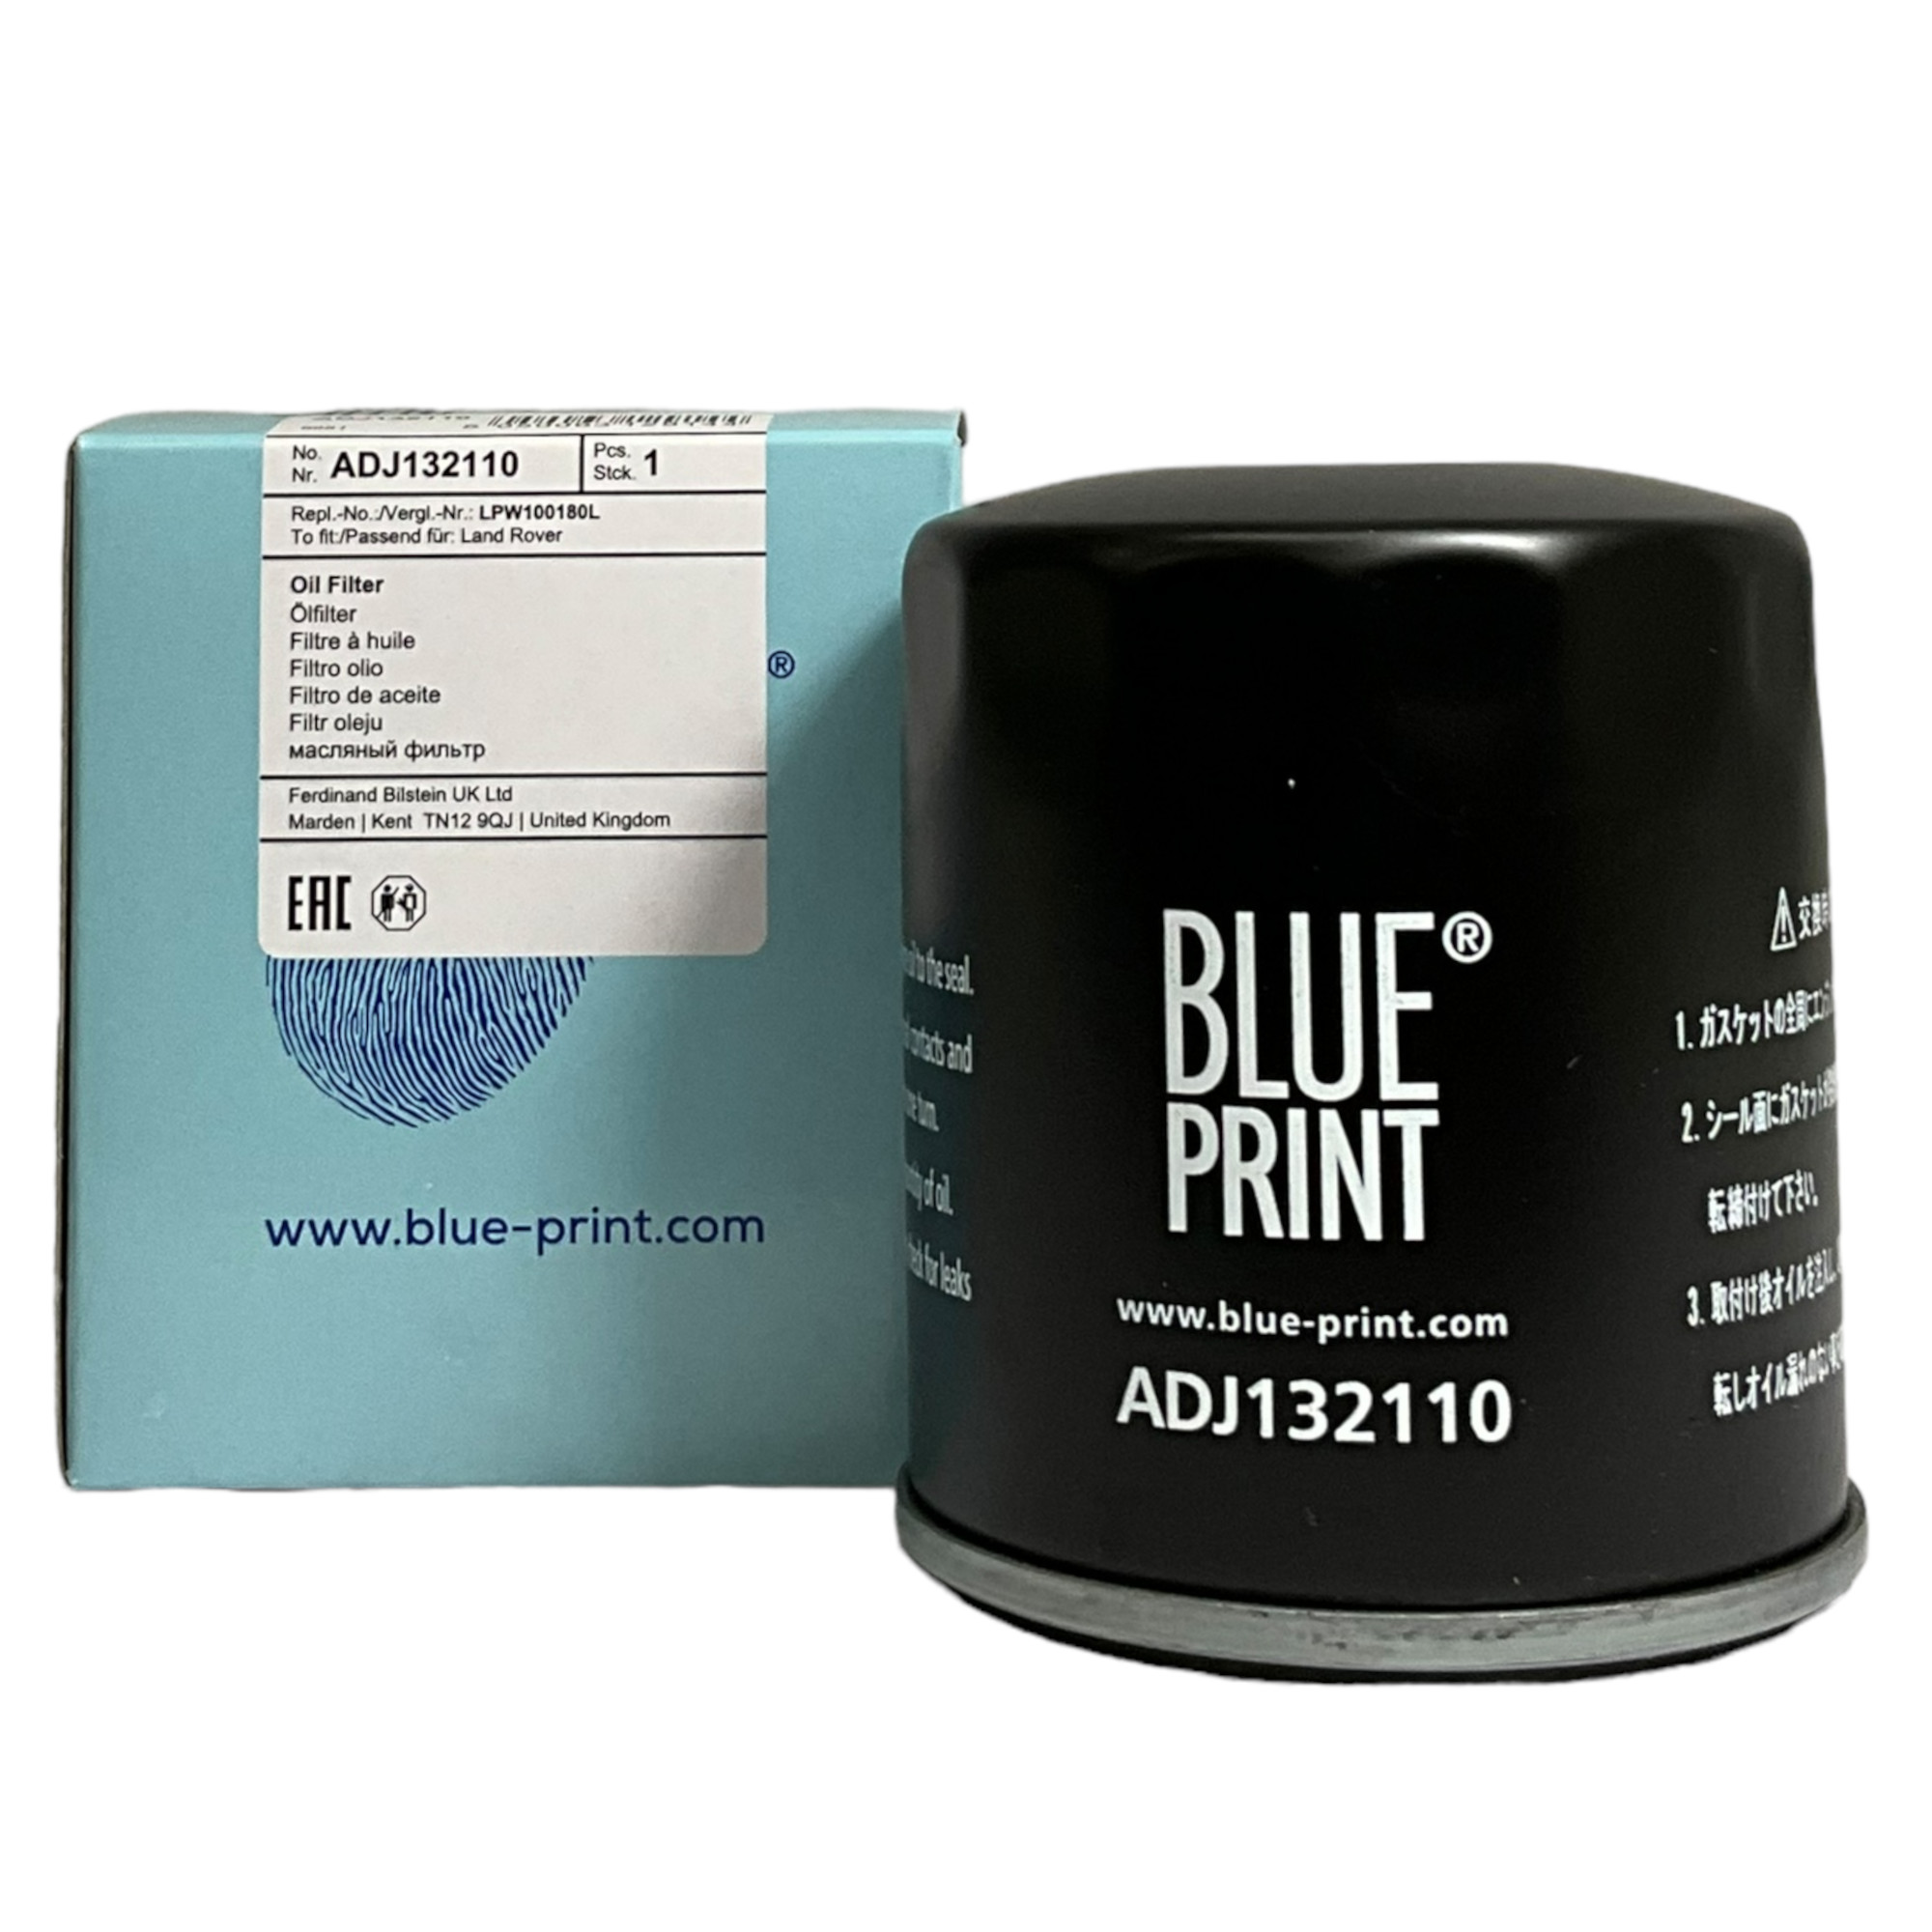 Blue Print Oil Filter ADJ132110 for MG, Rover, Land Rover, Lotus